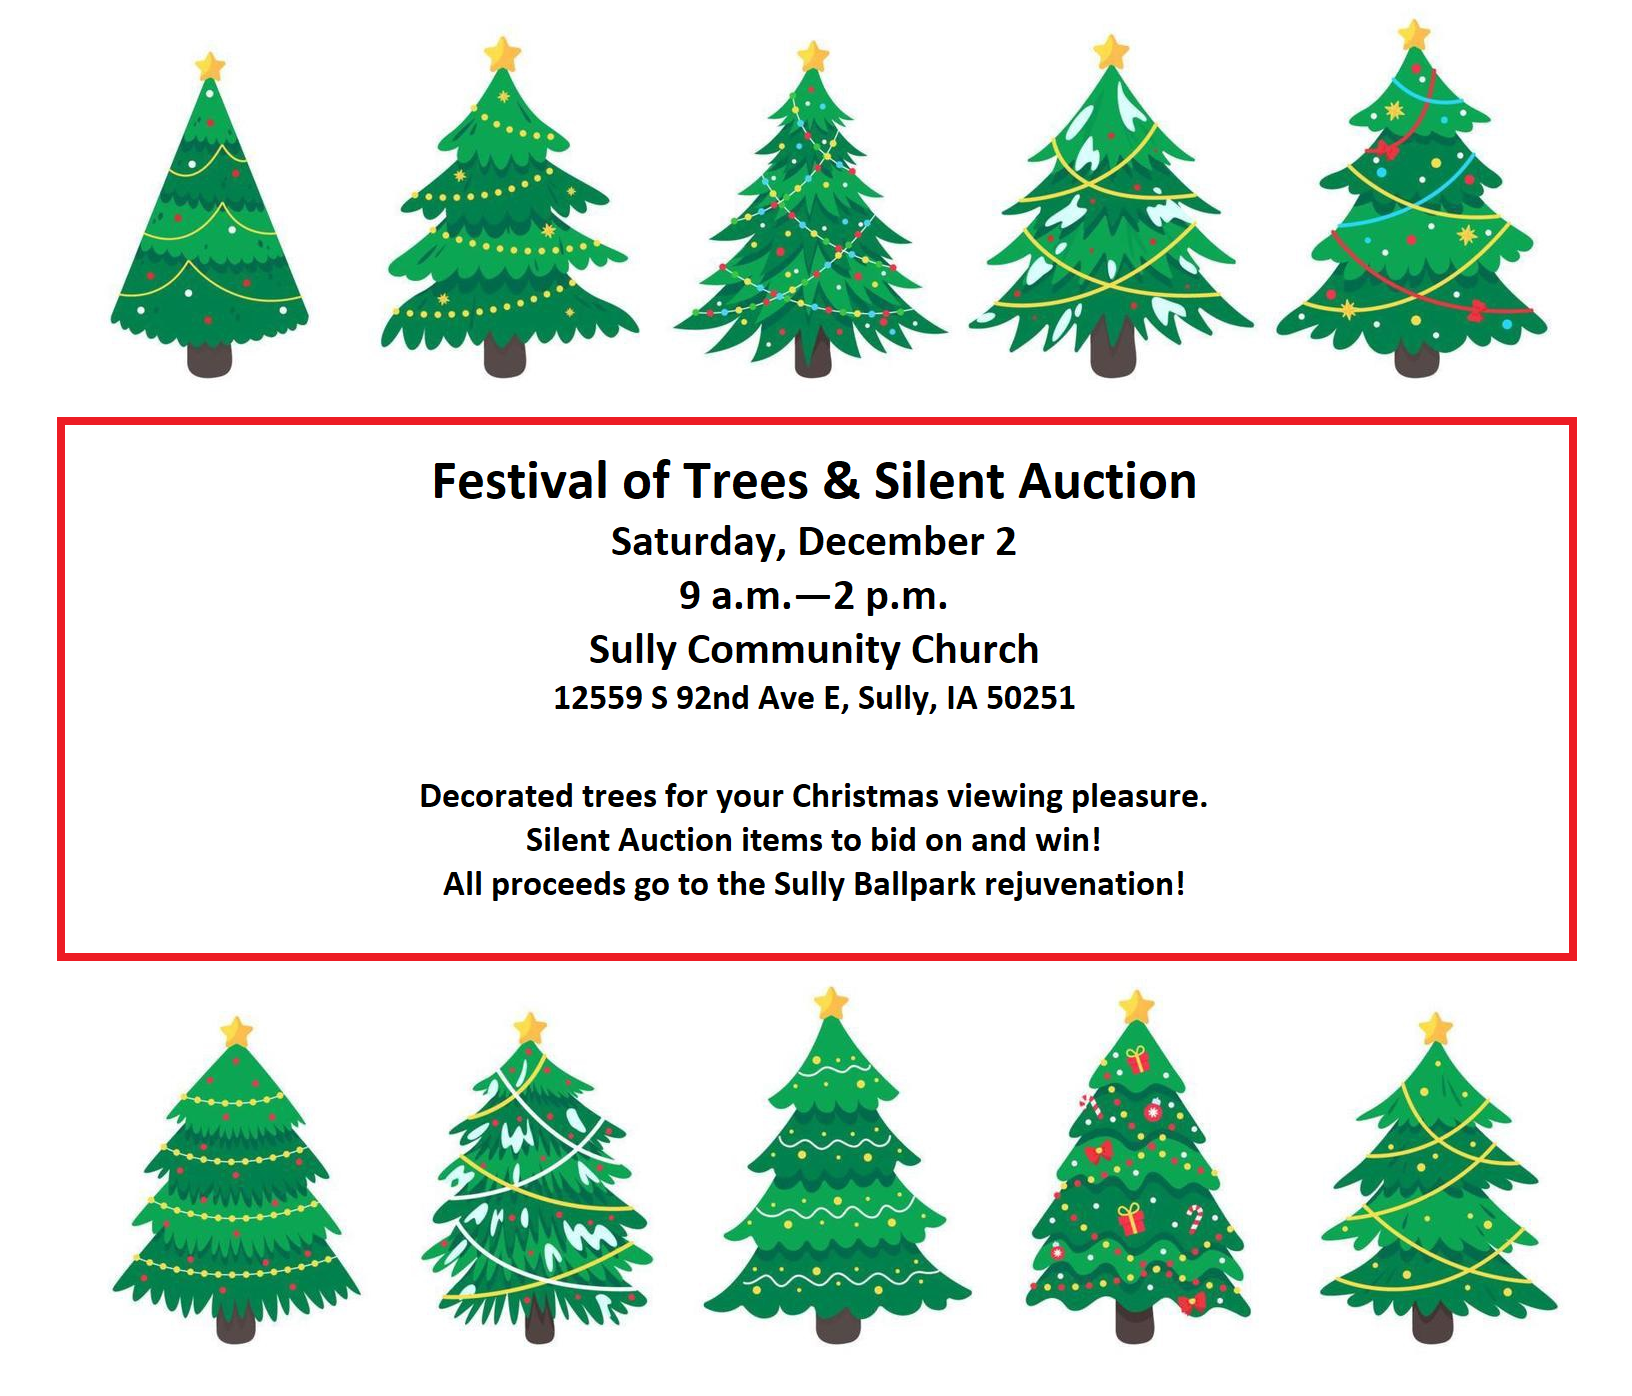 Event Promo Photo For Festival of Trees & Silent Auction